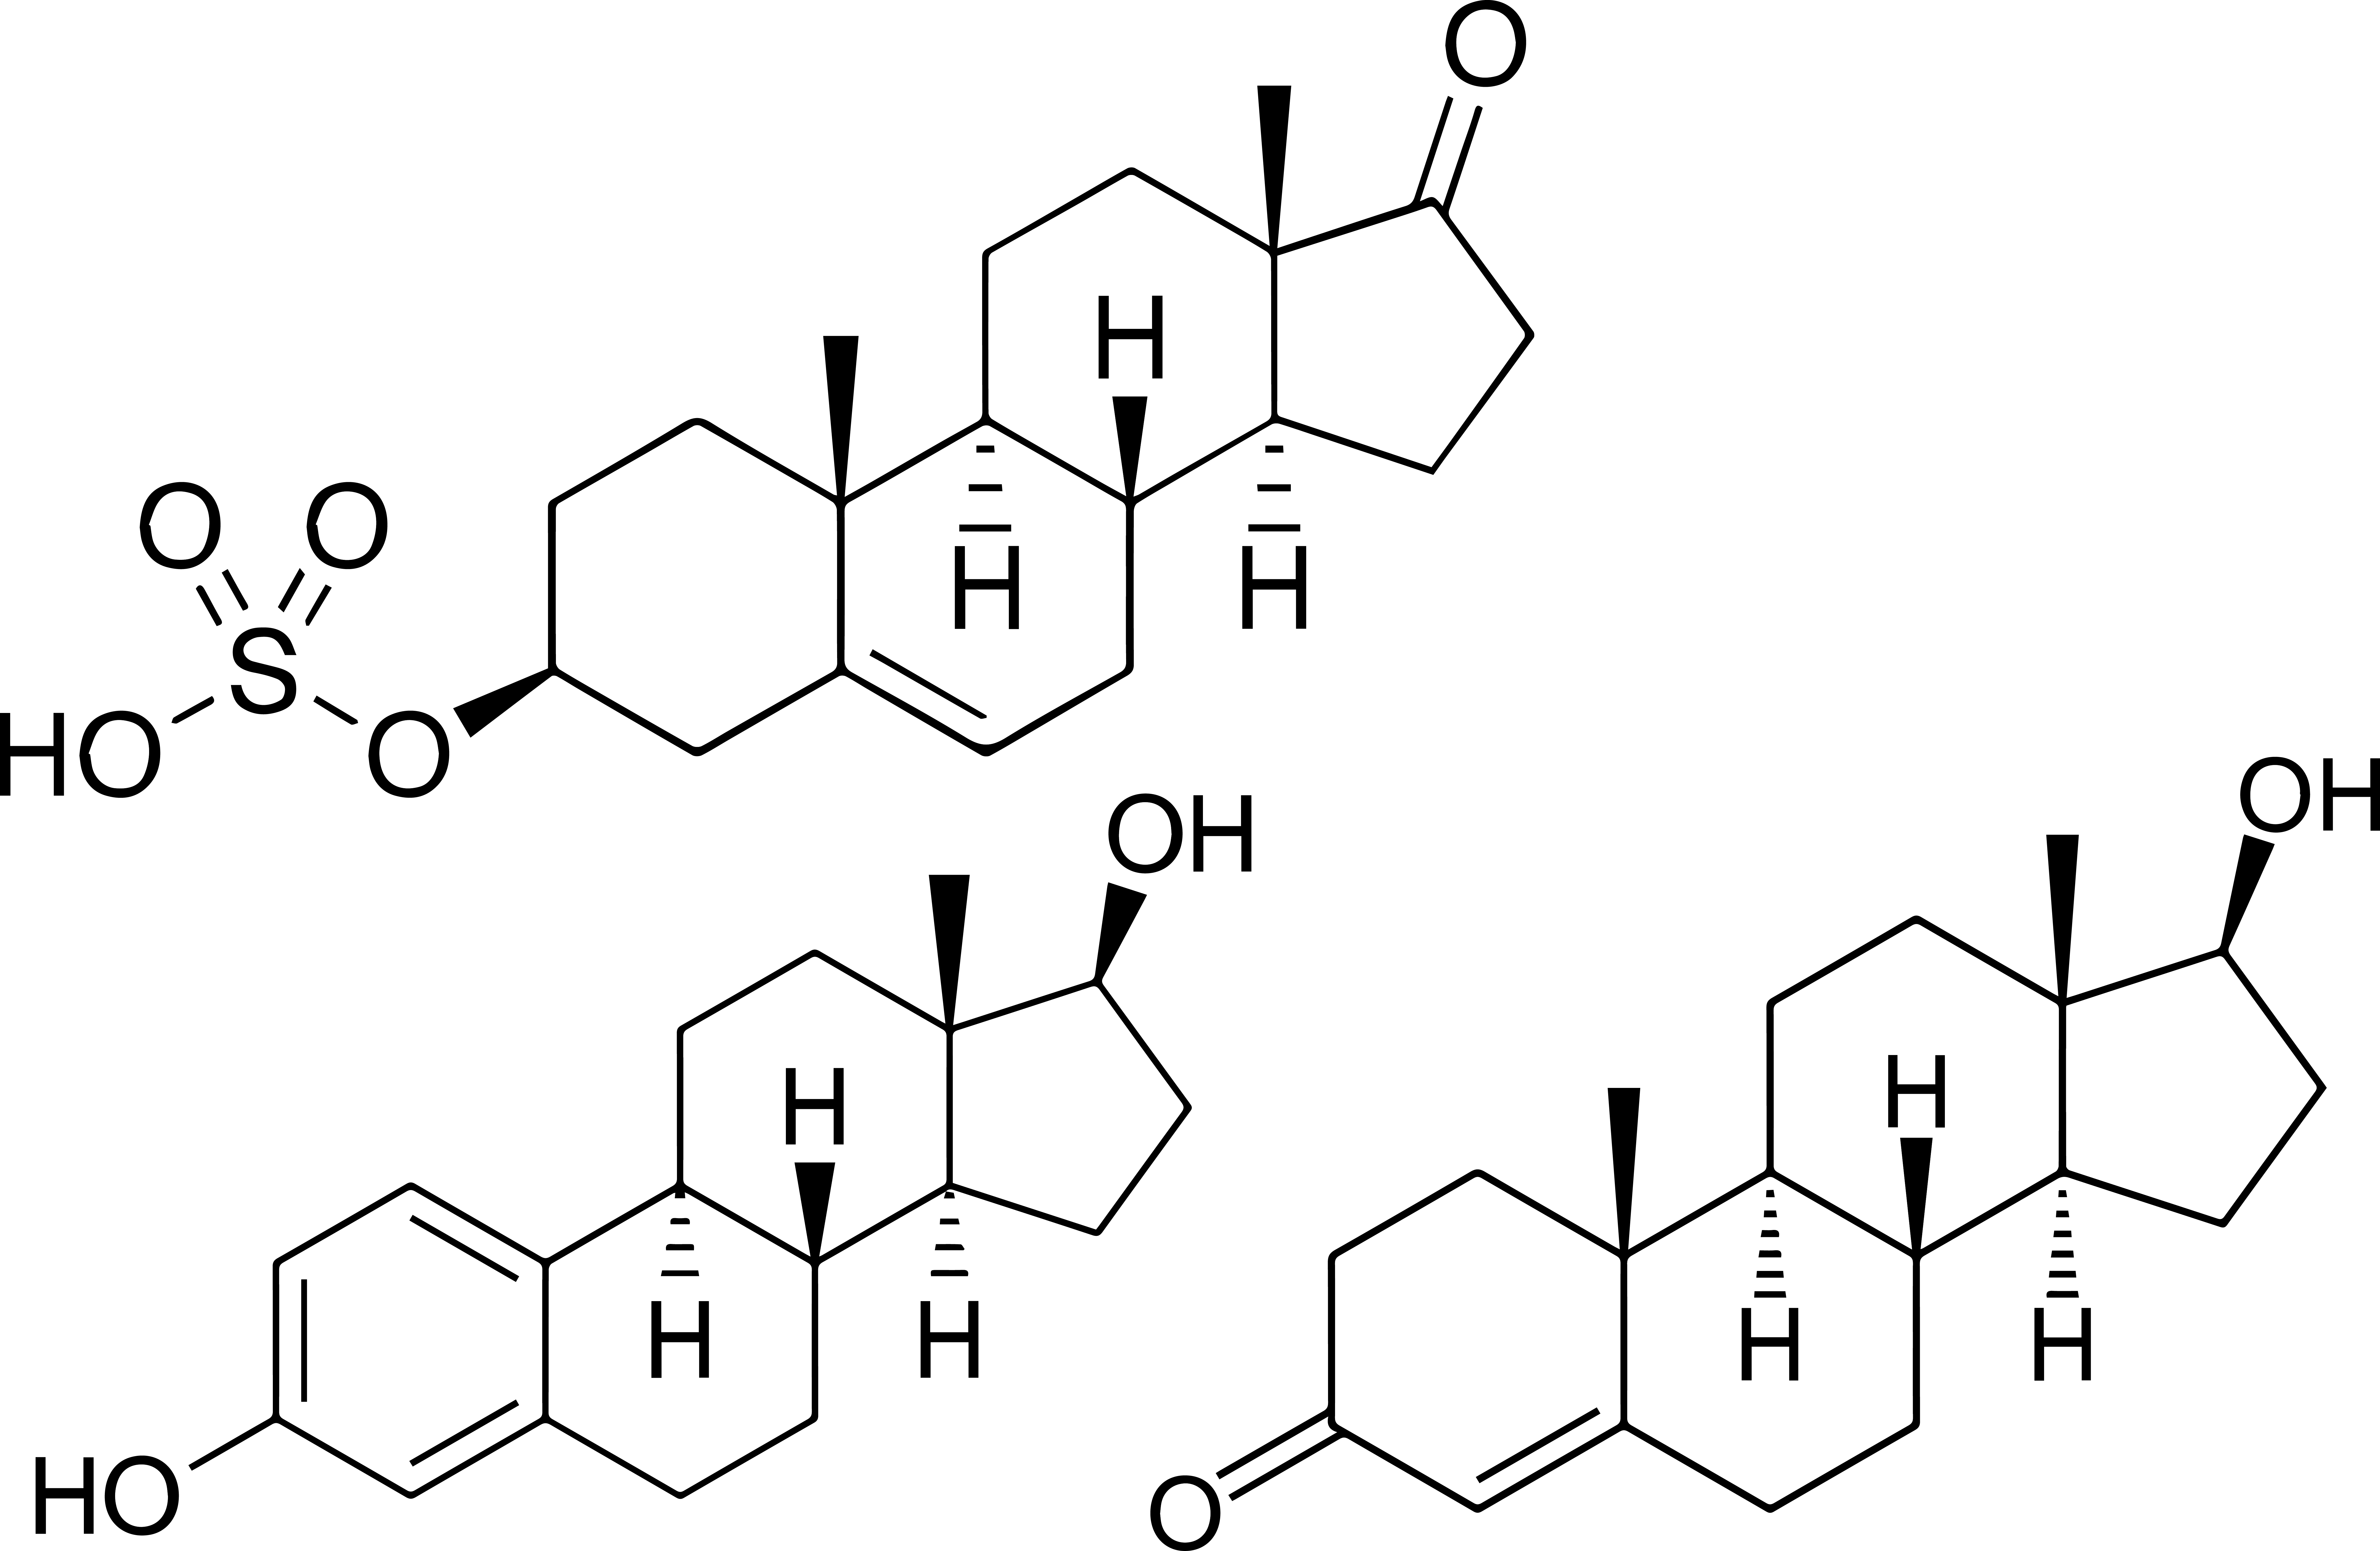 Human Steriods from Serum